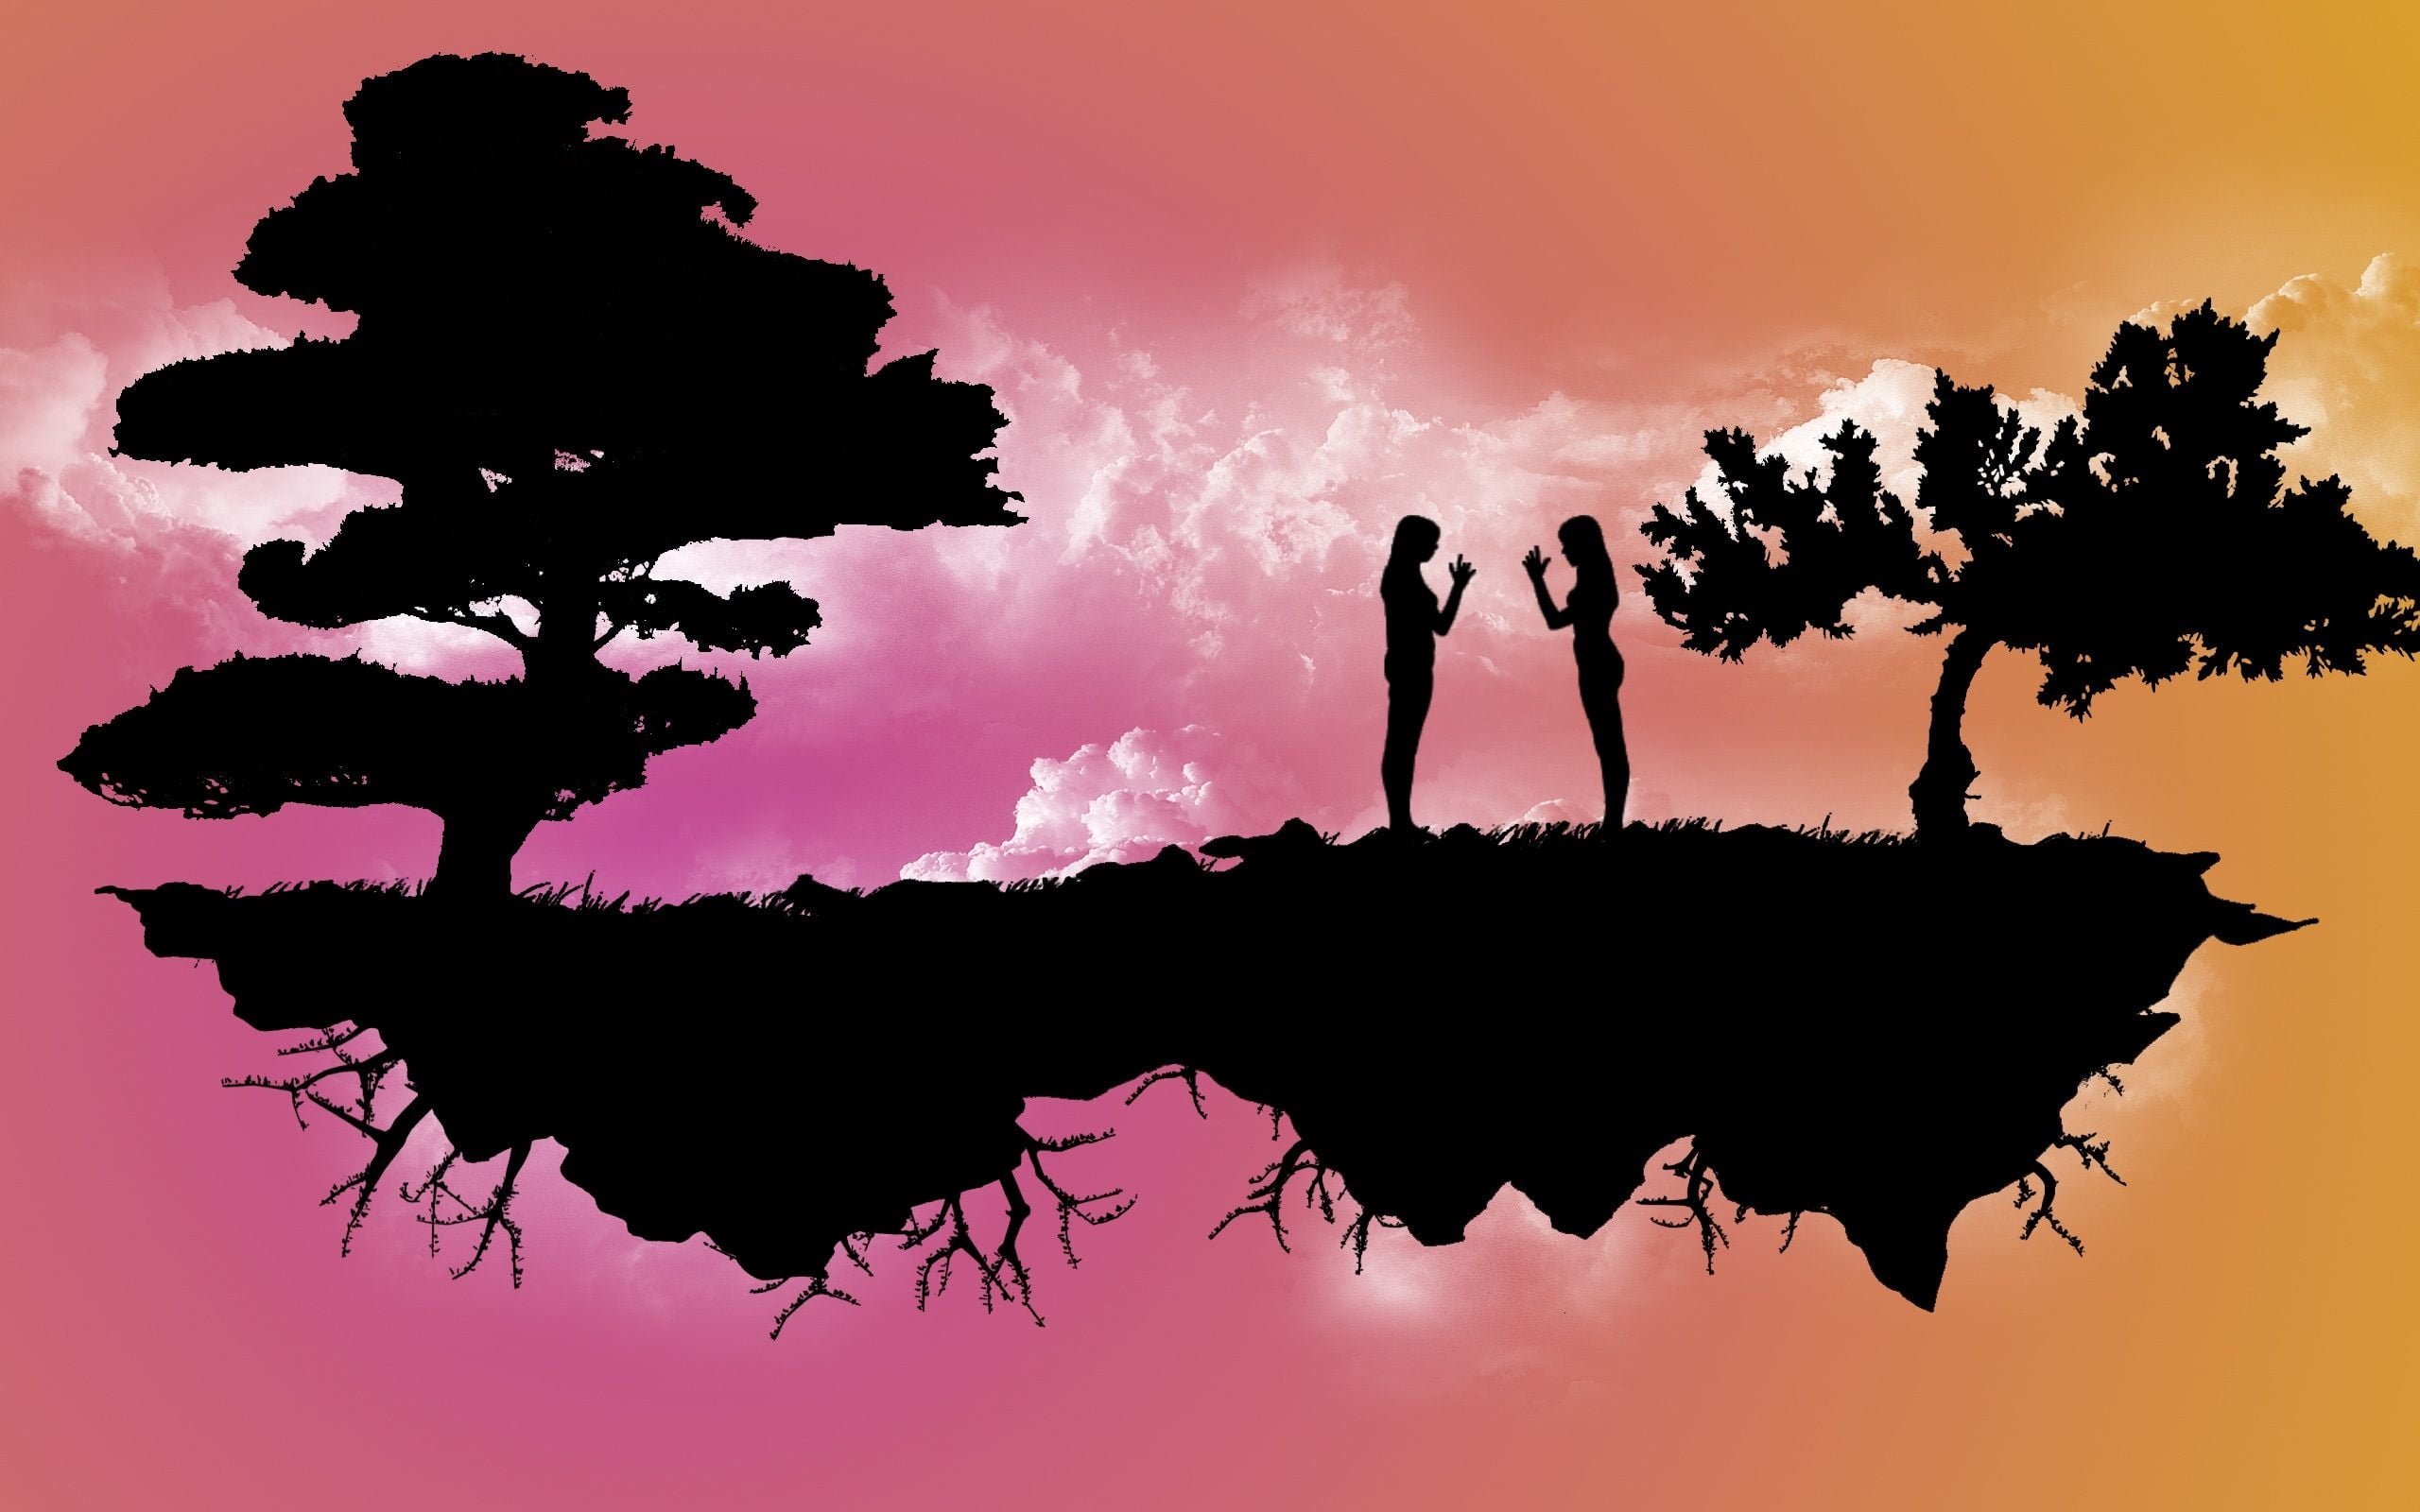 illustration of a floating island and silhouette of two person